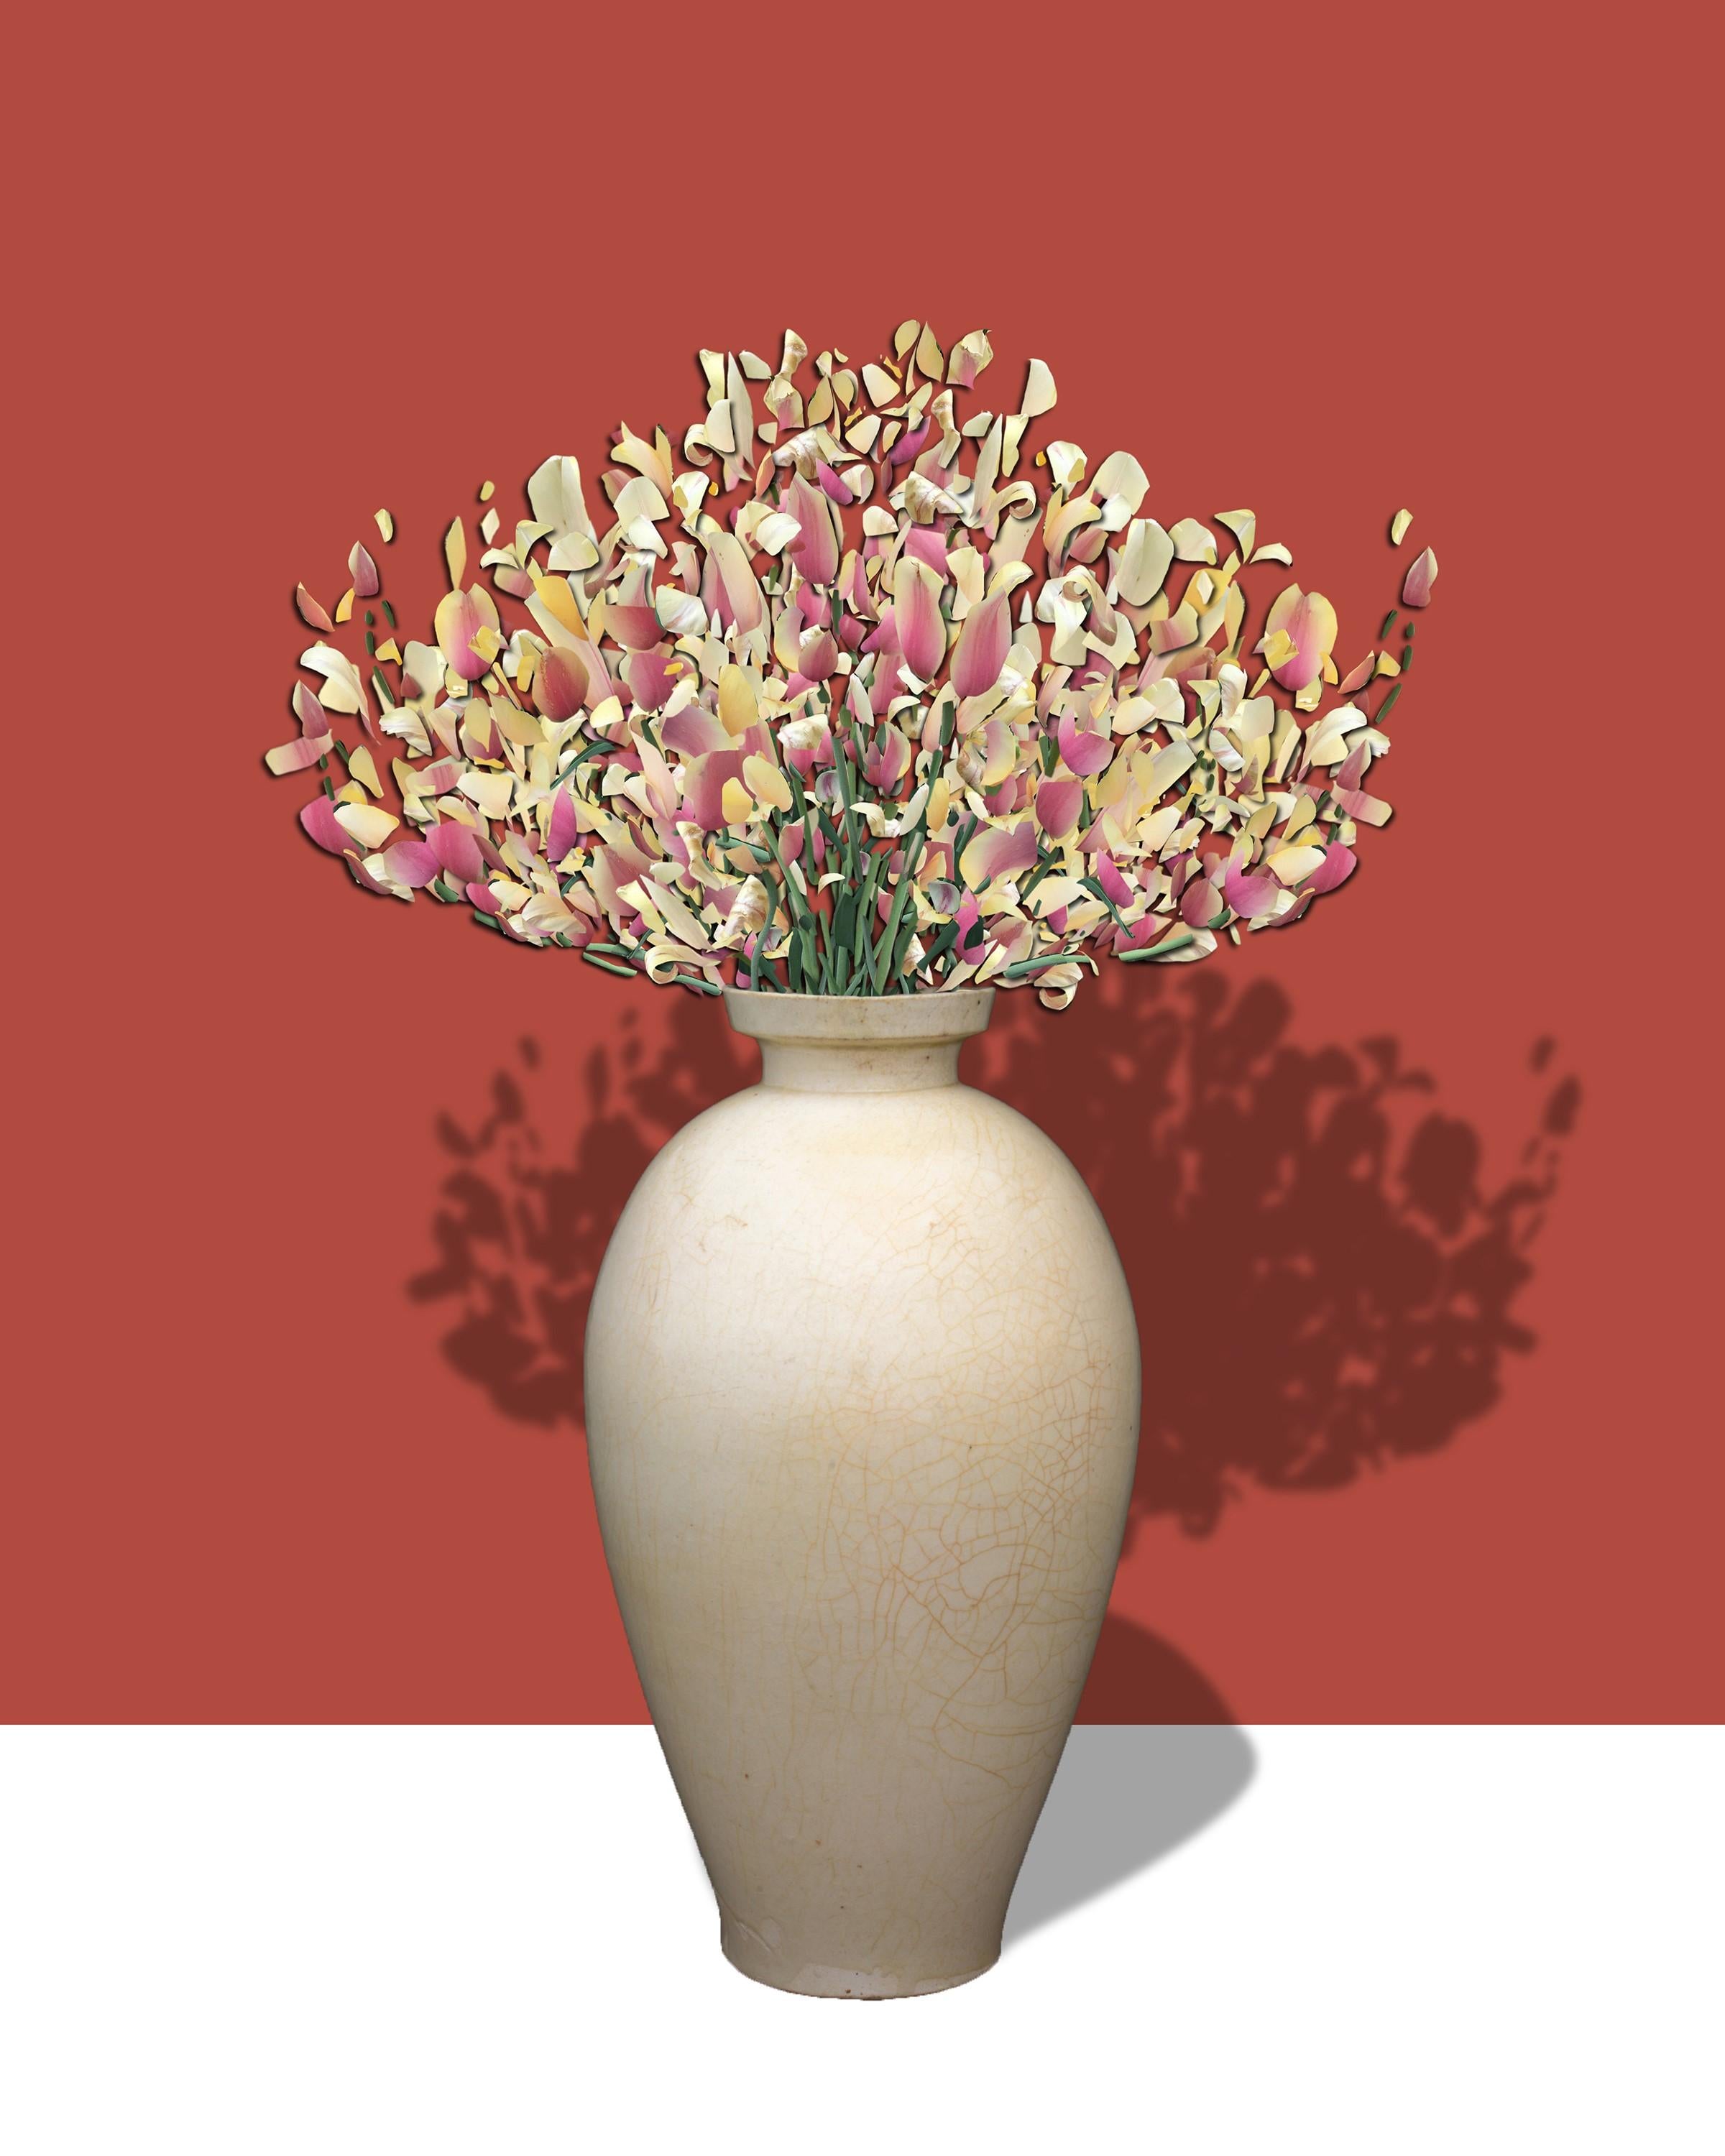 Bryan Meador Still-Life Photograph - Contessa 1000 AD: Abstract Flower Still Life of Antique Vase on Coral Background